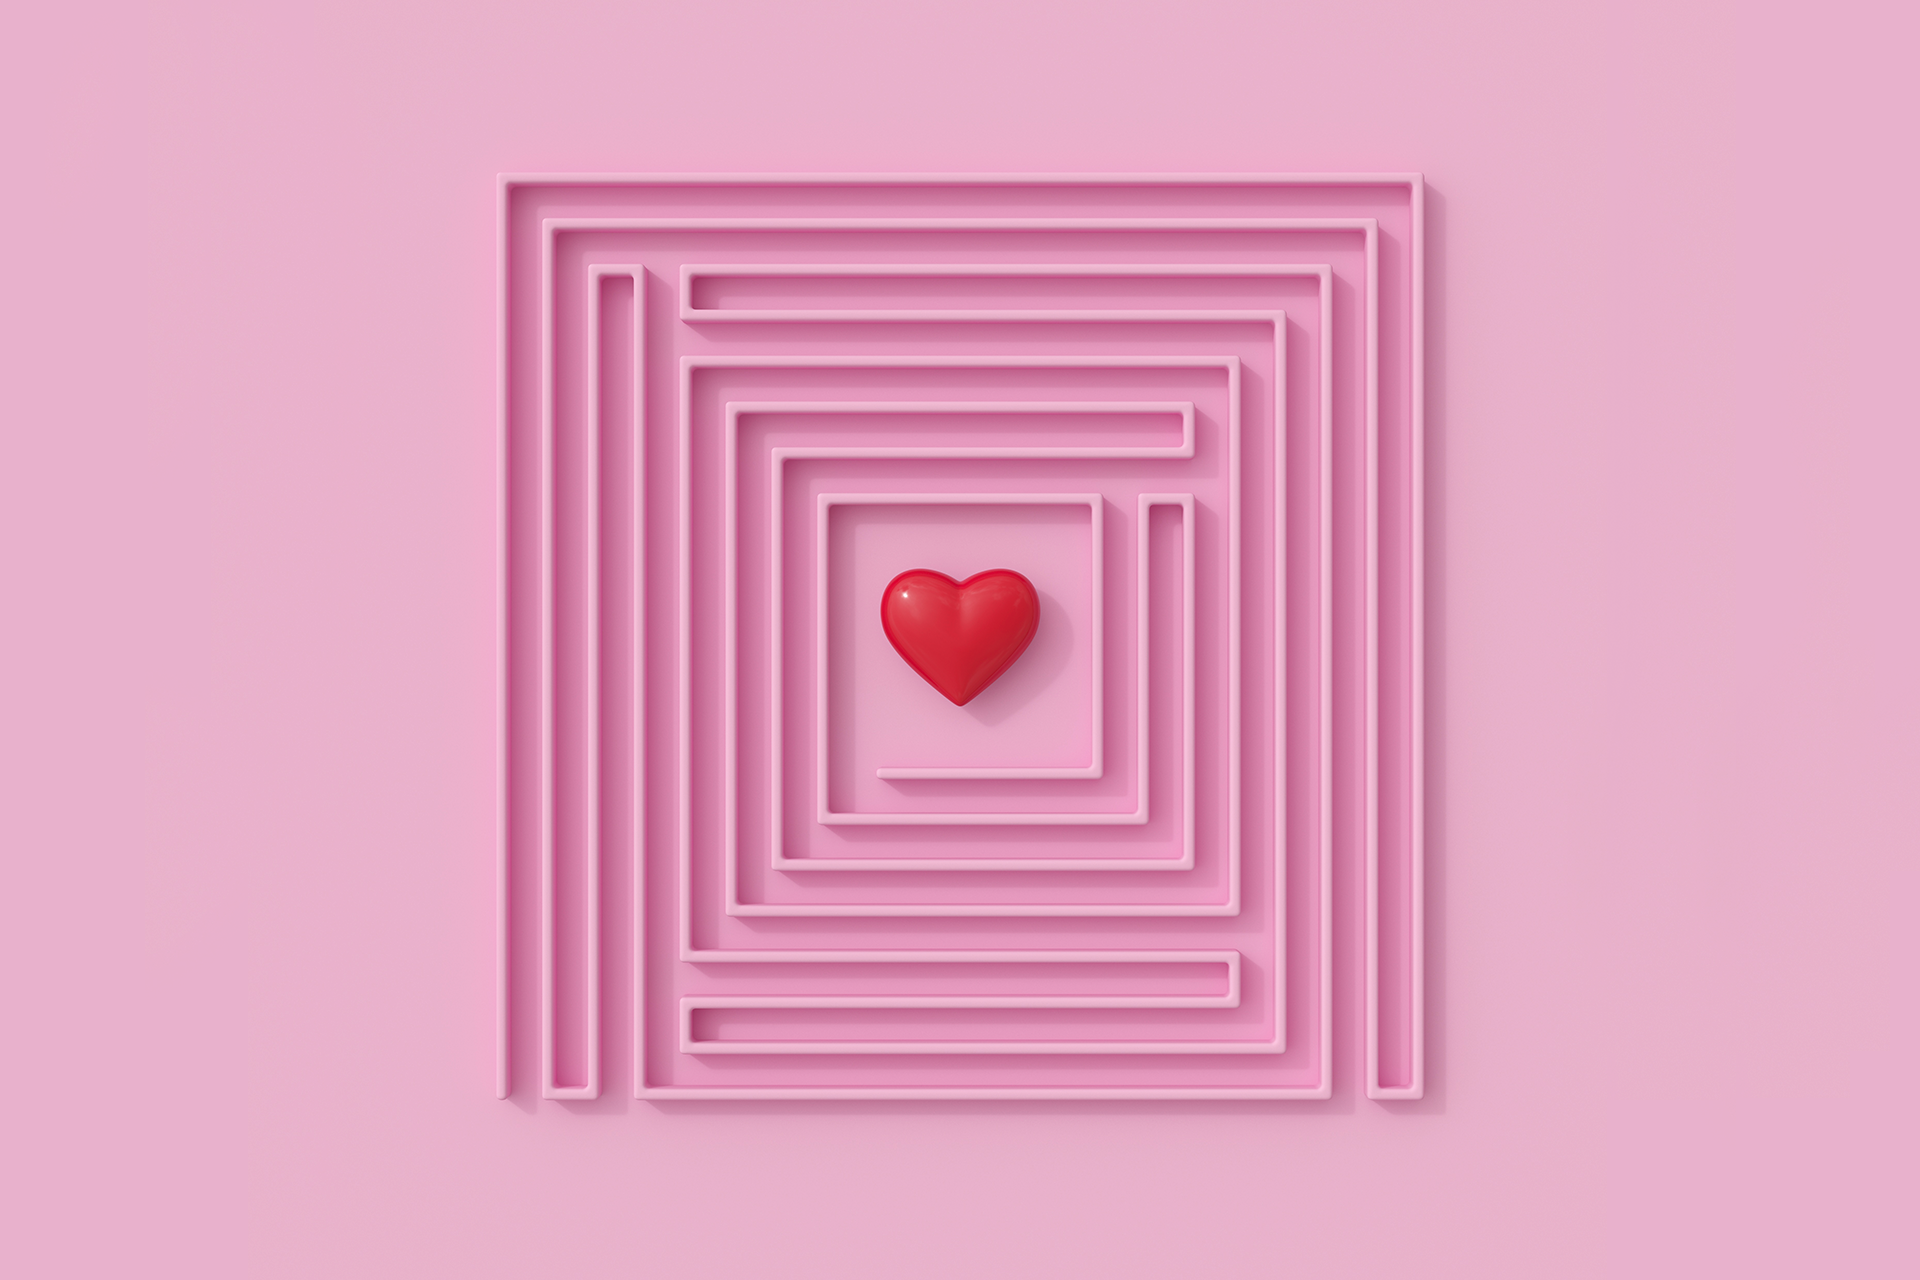 Customer loyalty is hard to achieve, and this image of a maze from above with a heart in the center perfectly represents the tireless journey marketers must embark on to achieve customer loyalty.